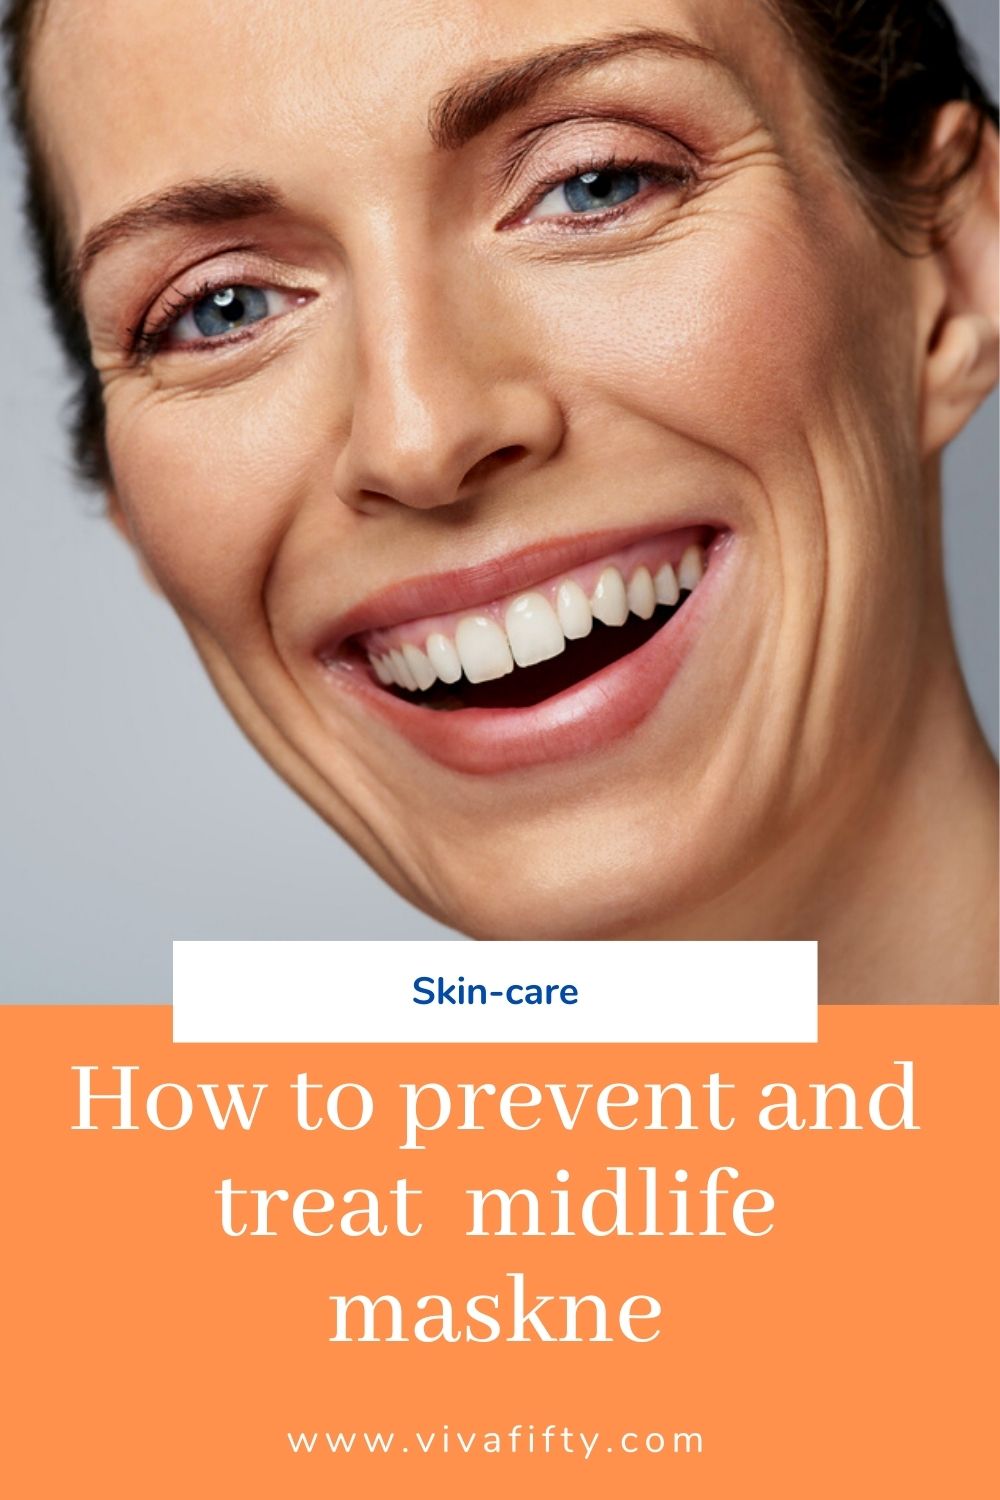 Maskne, acne induced by mask-wearing, can also show up in midlife. Here is how to prevent and treat it.